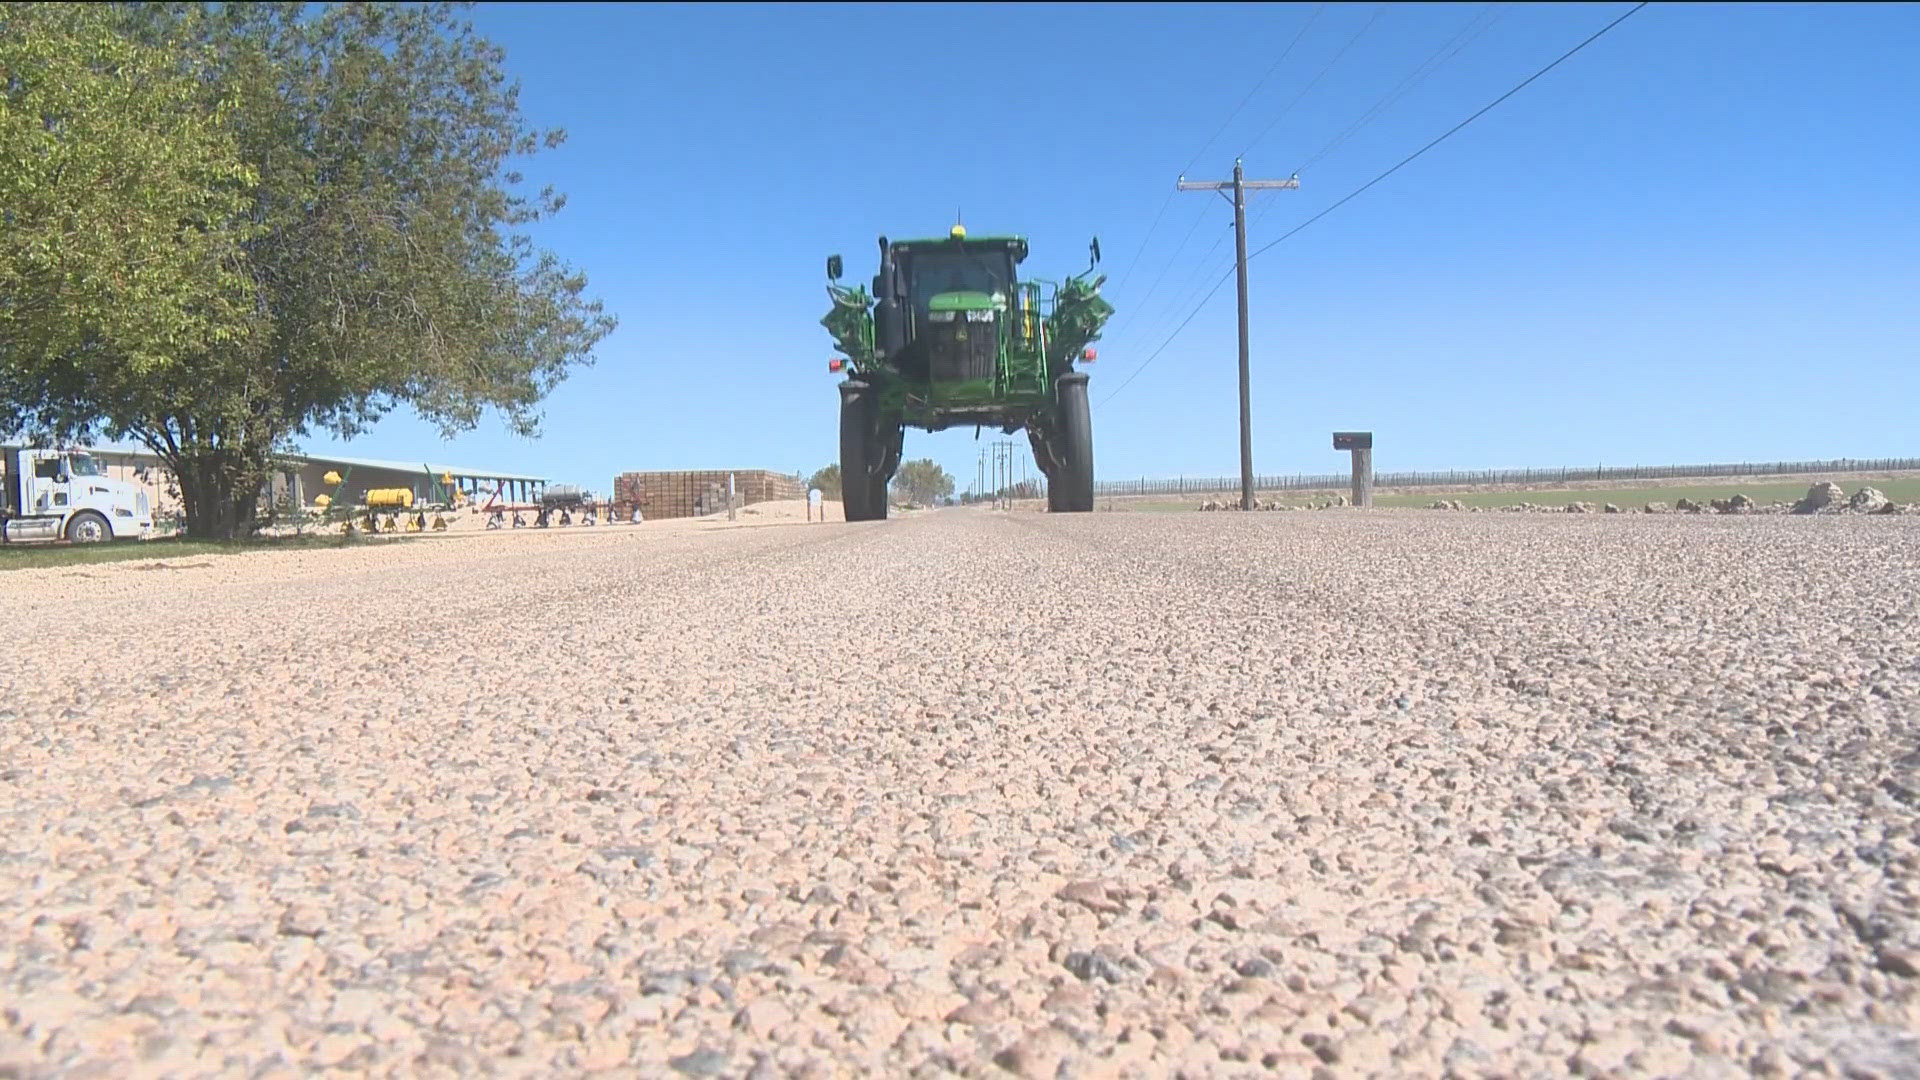 For Idaho farmers, springtime means tractors and large arm equipment are often out on rural roads.